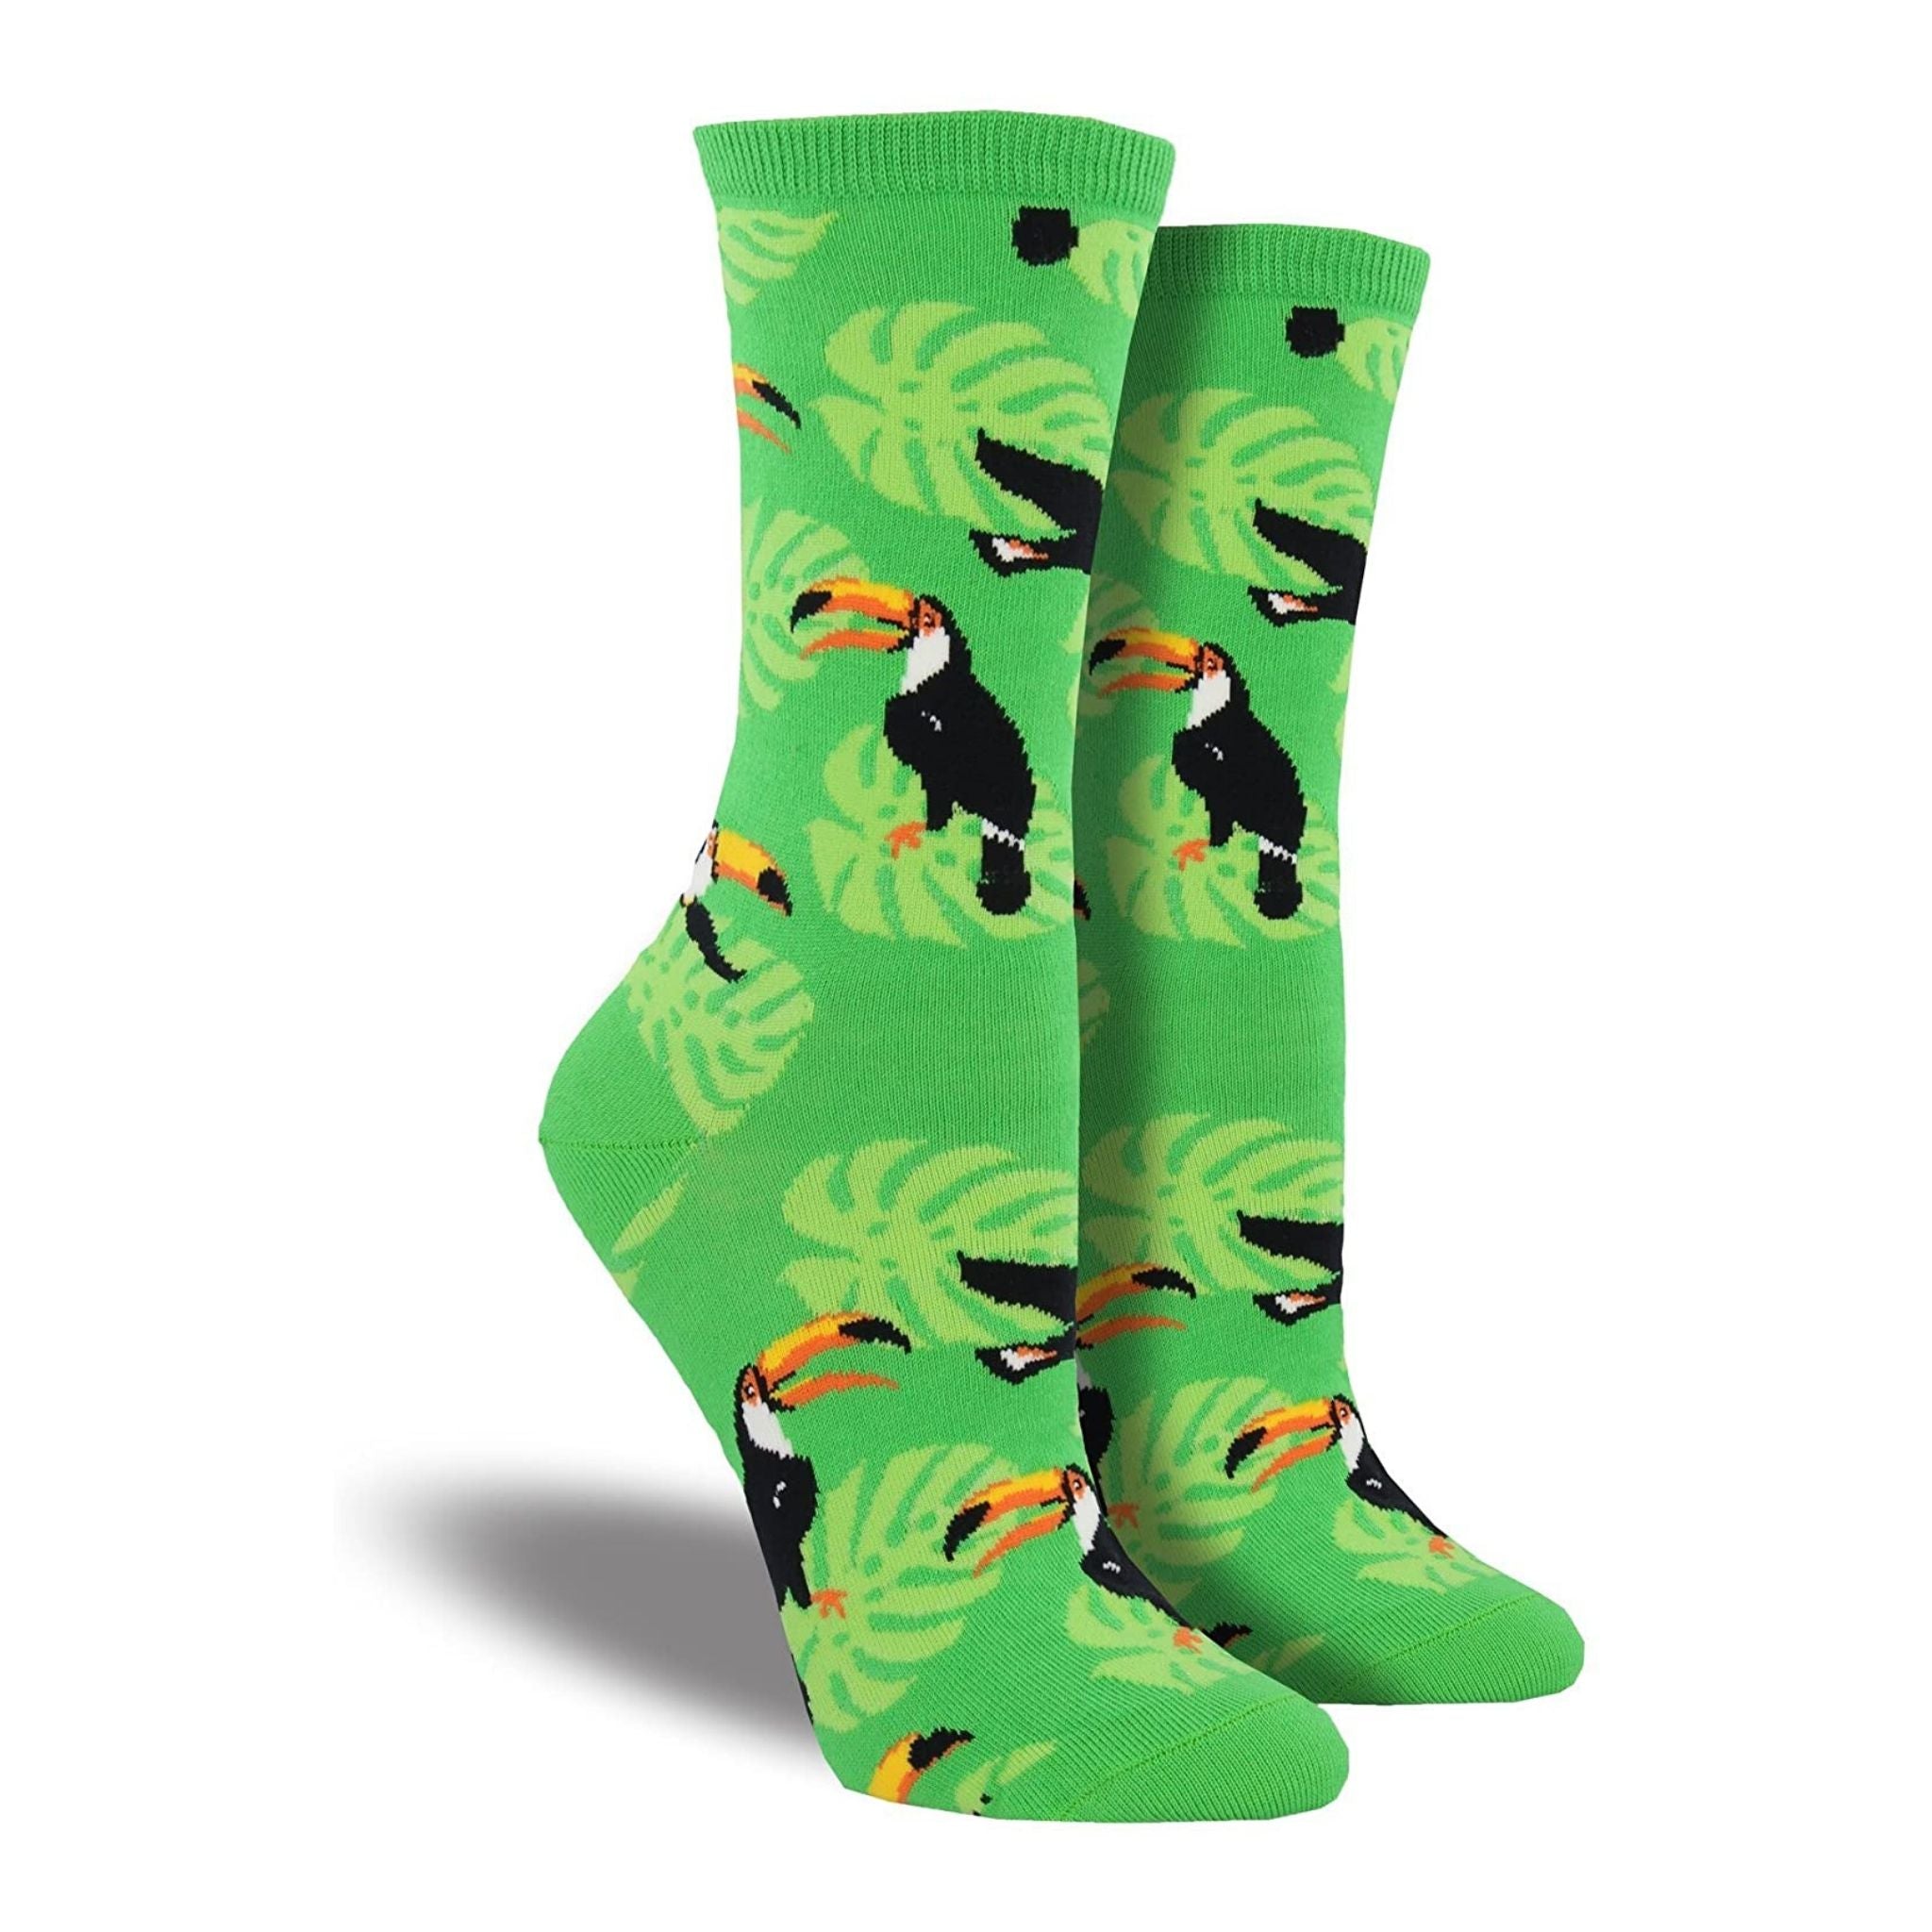 Green socks with toucans and leaves on them